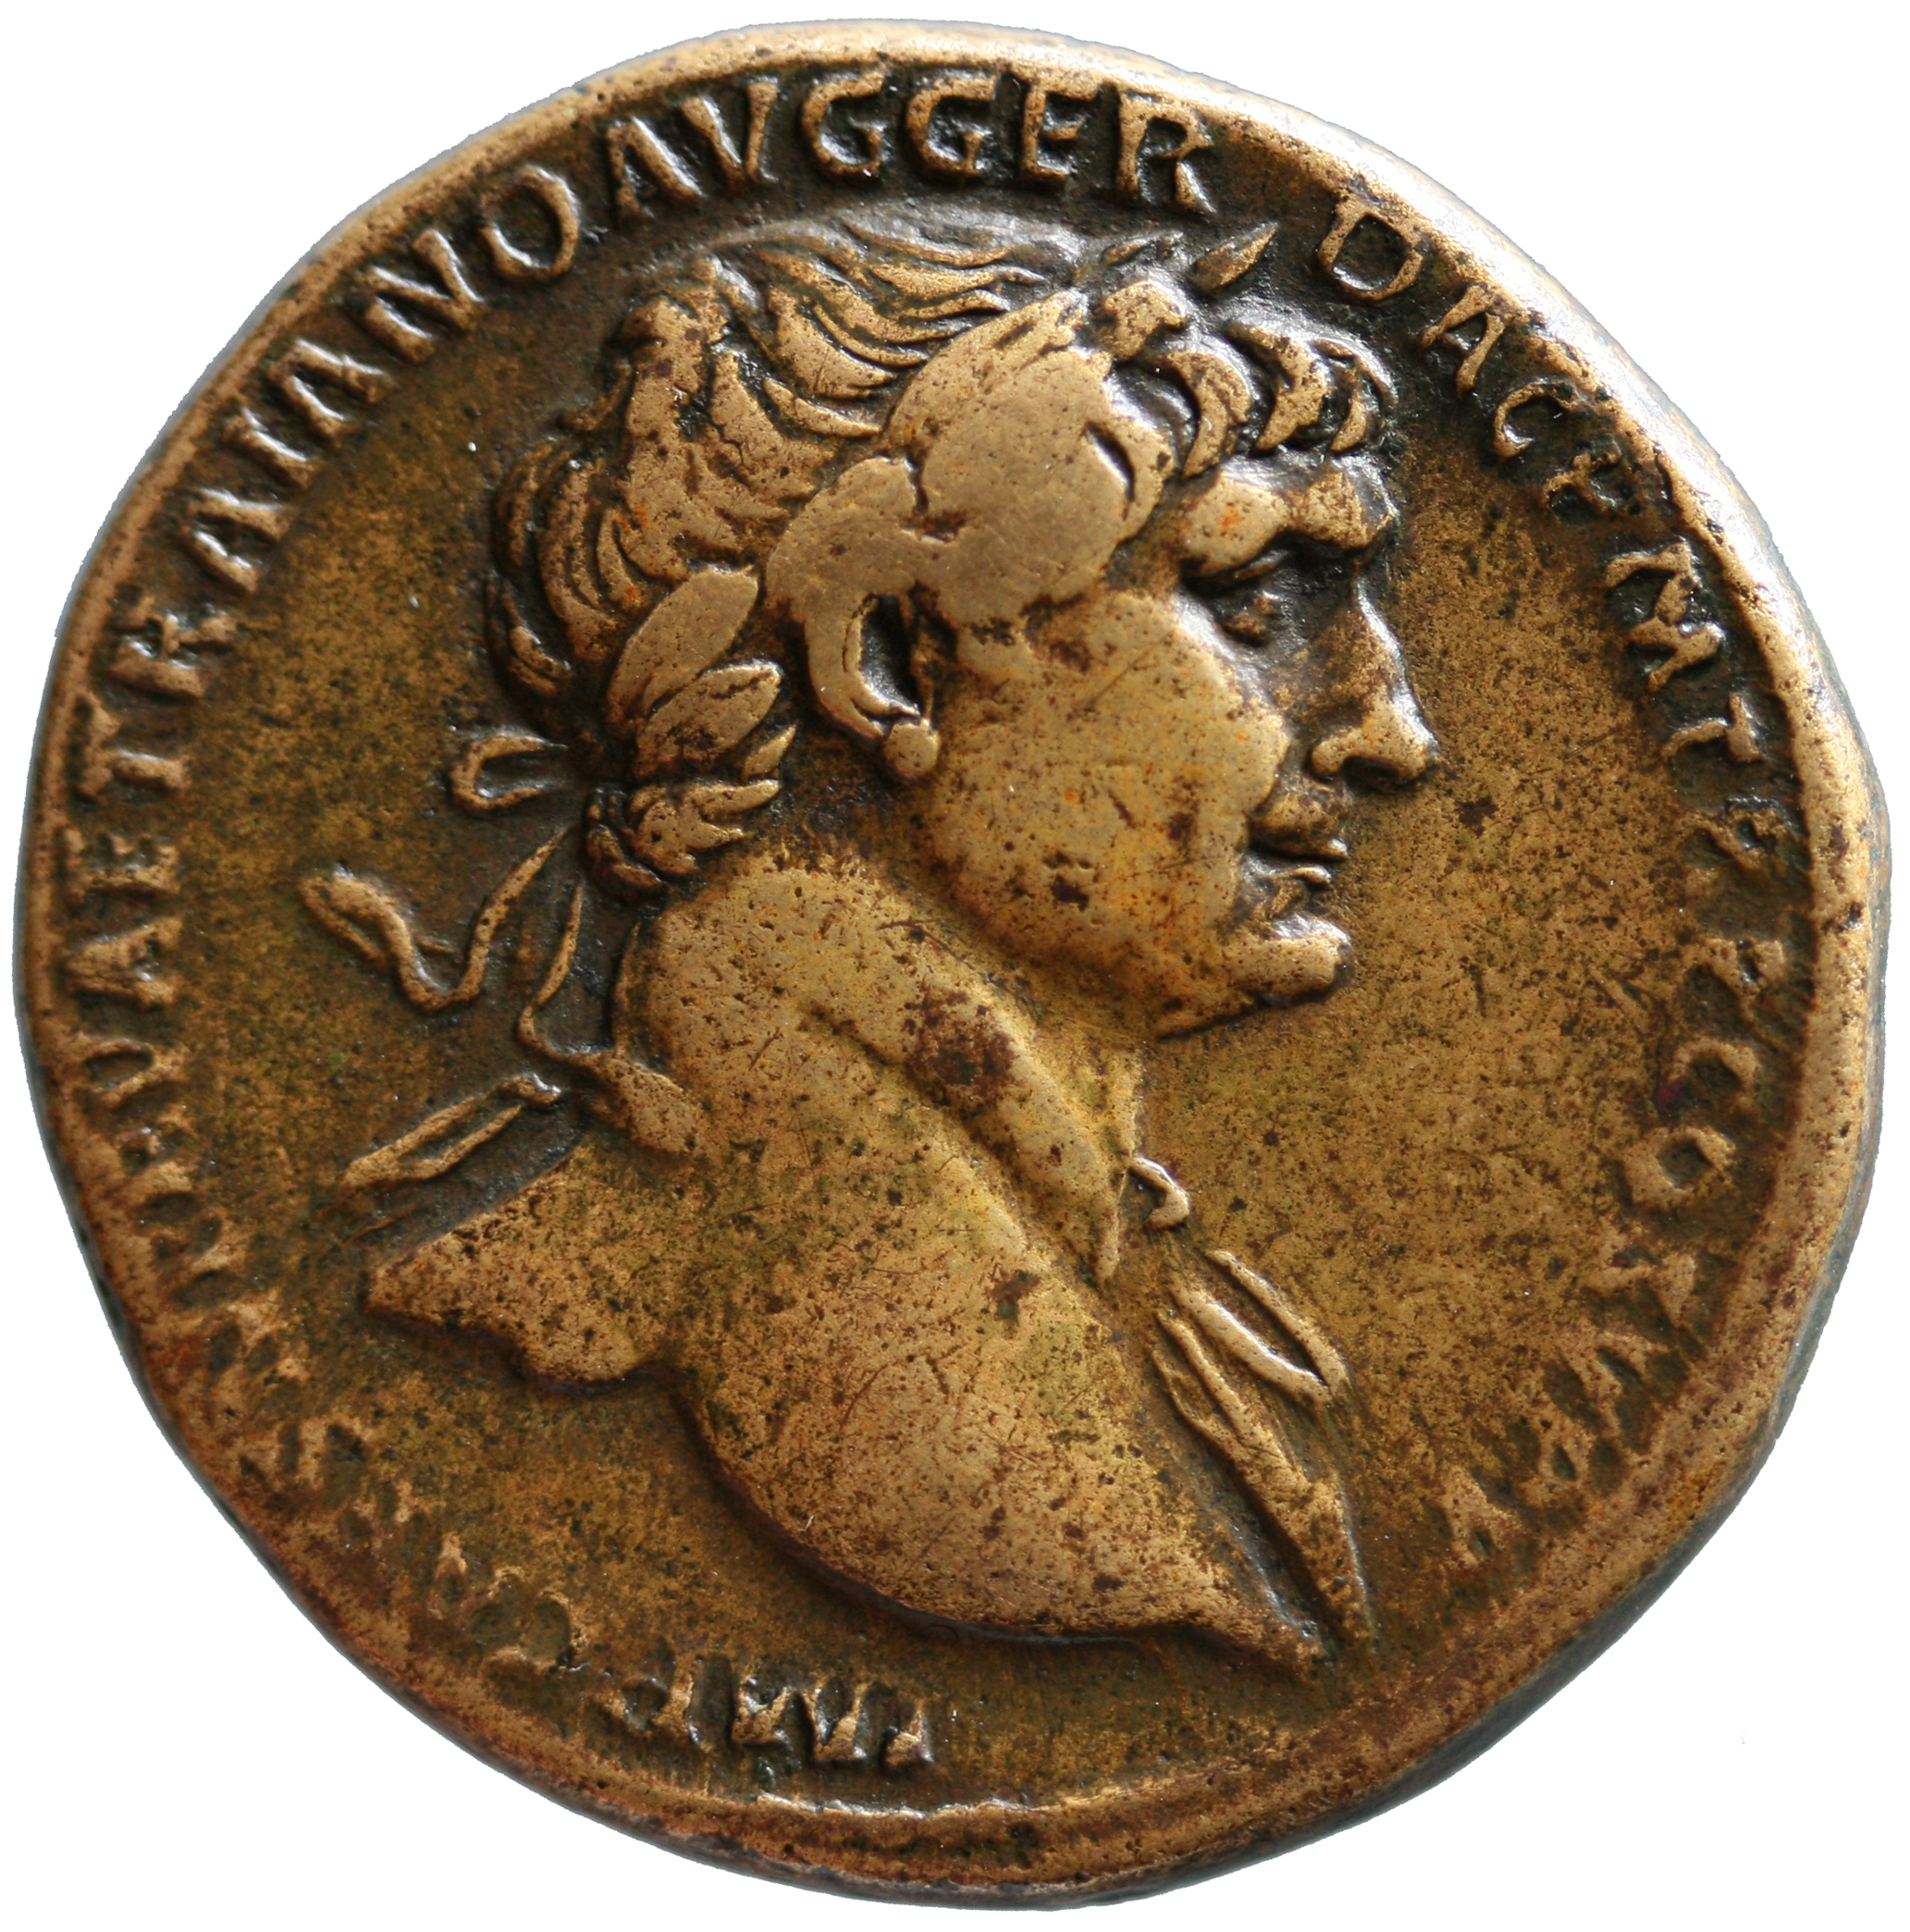 Online Coins of the Roman Empire: RIC II Trajan 463 ...